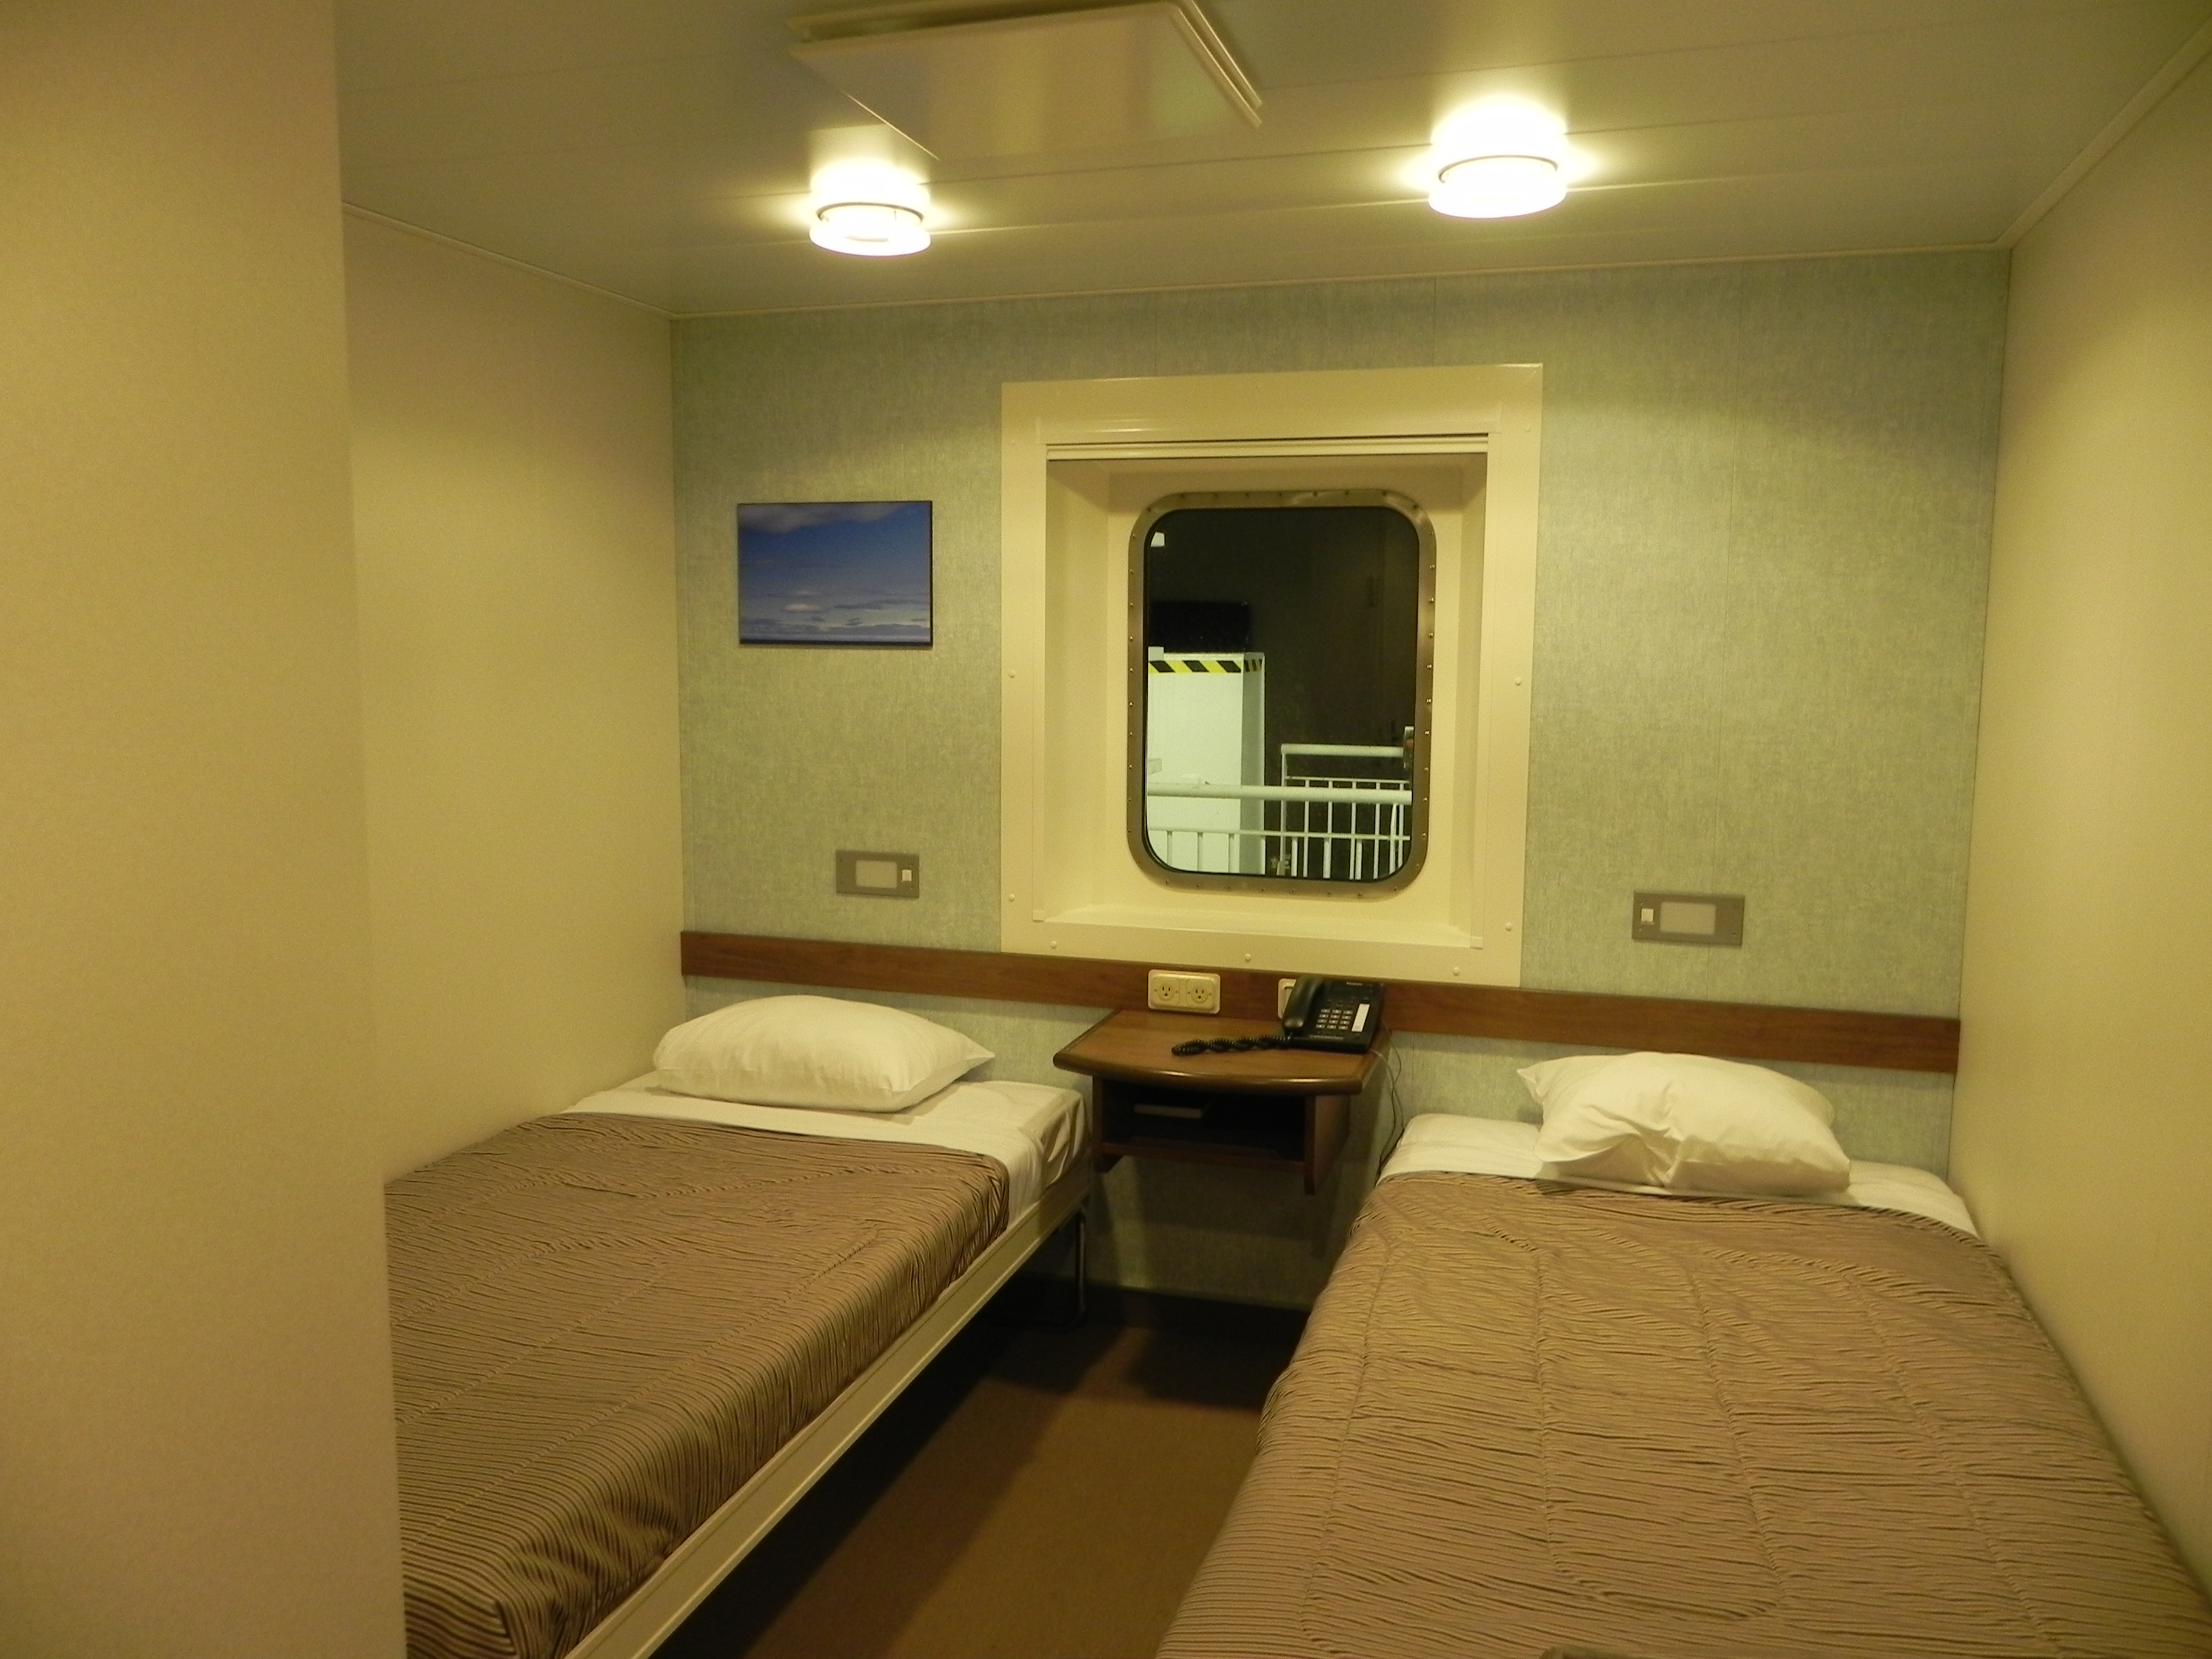 MV Northern Expedition-outer stateroom-01